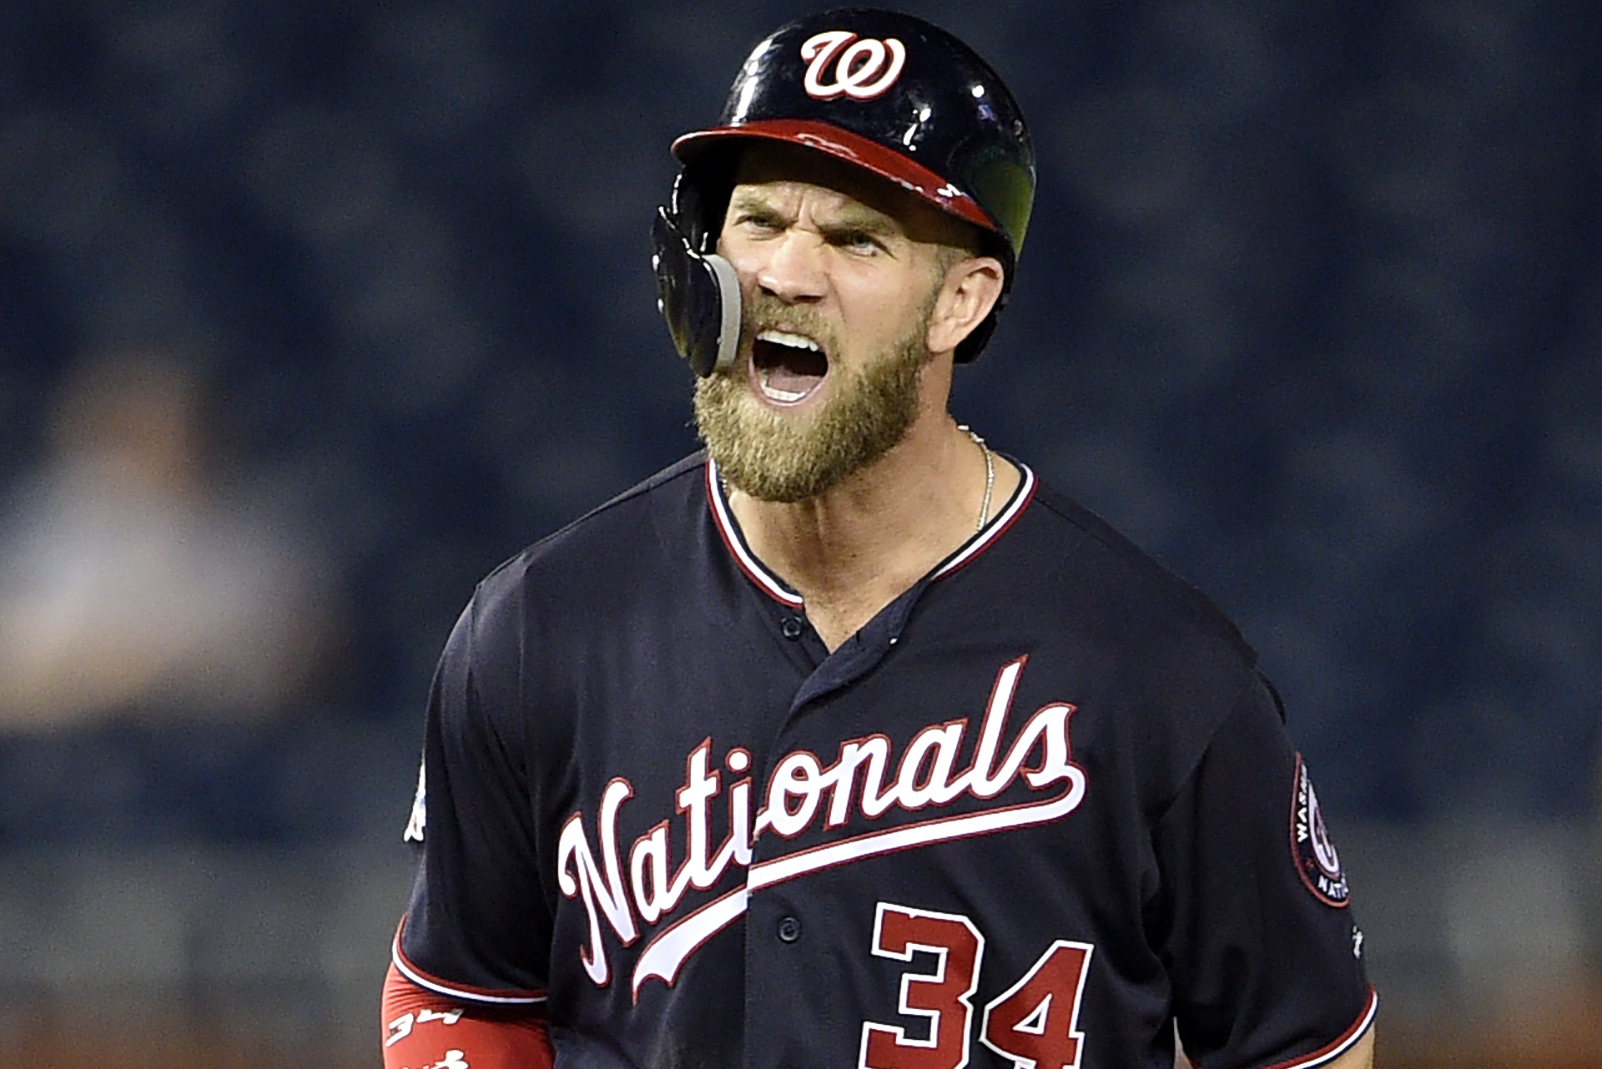 Bryce Harper lands on ESPN's list of the top 100 MLB players of